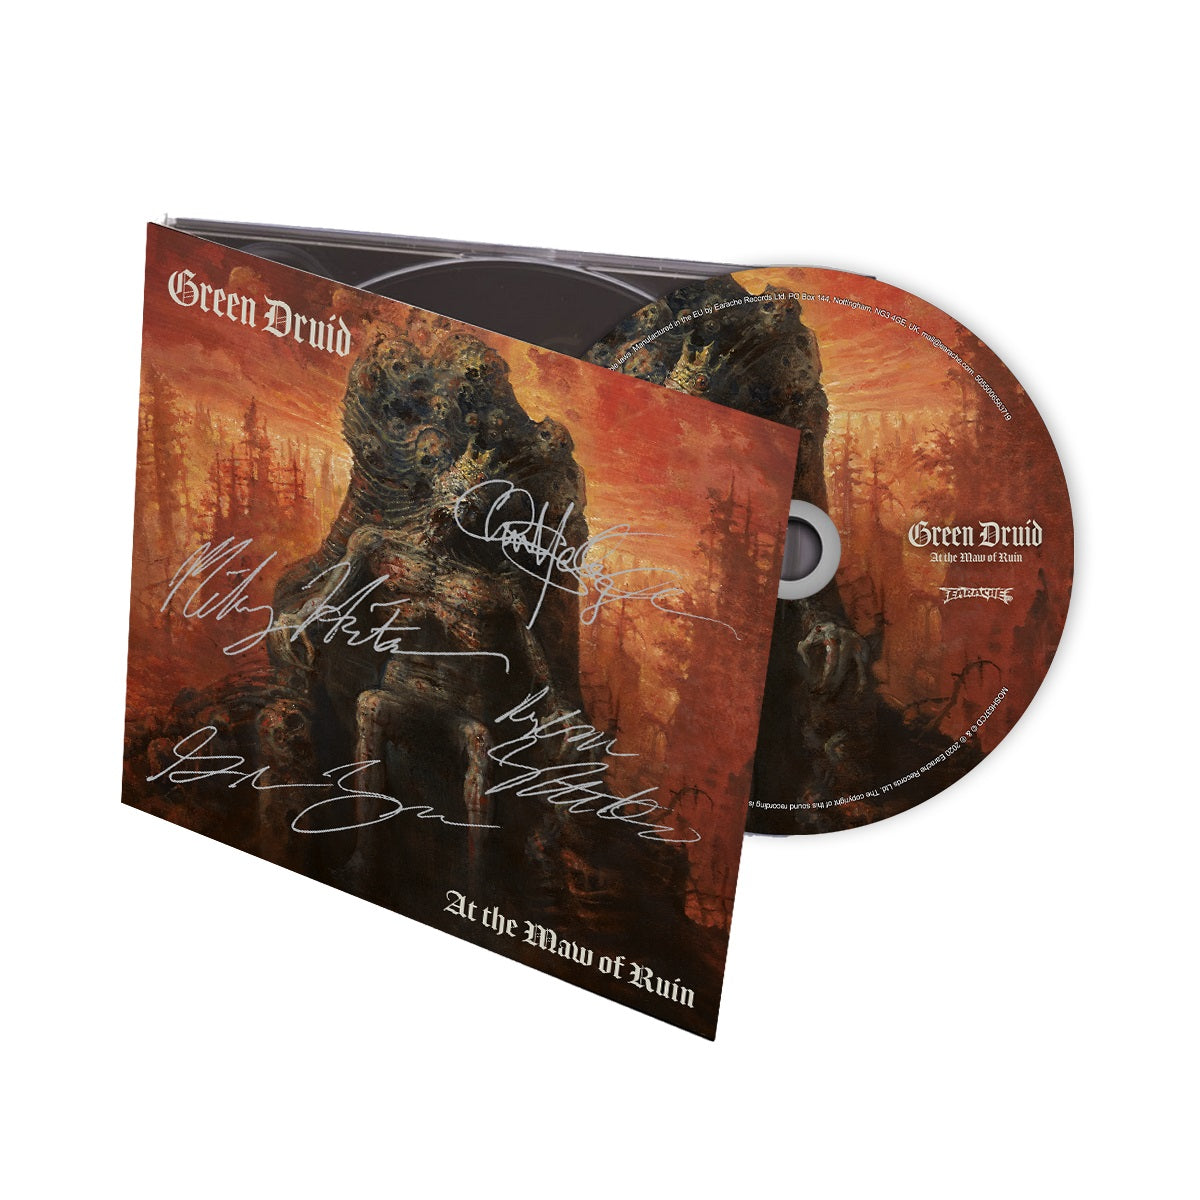 Green Druid "At The Maw Of Ruin" SIGNED CD